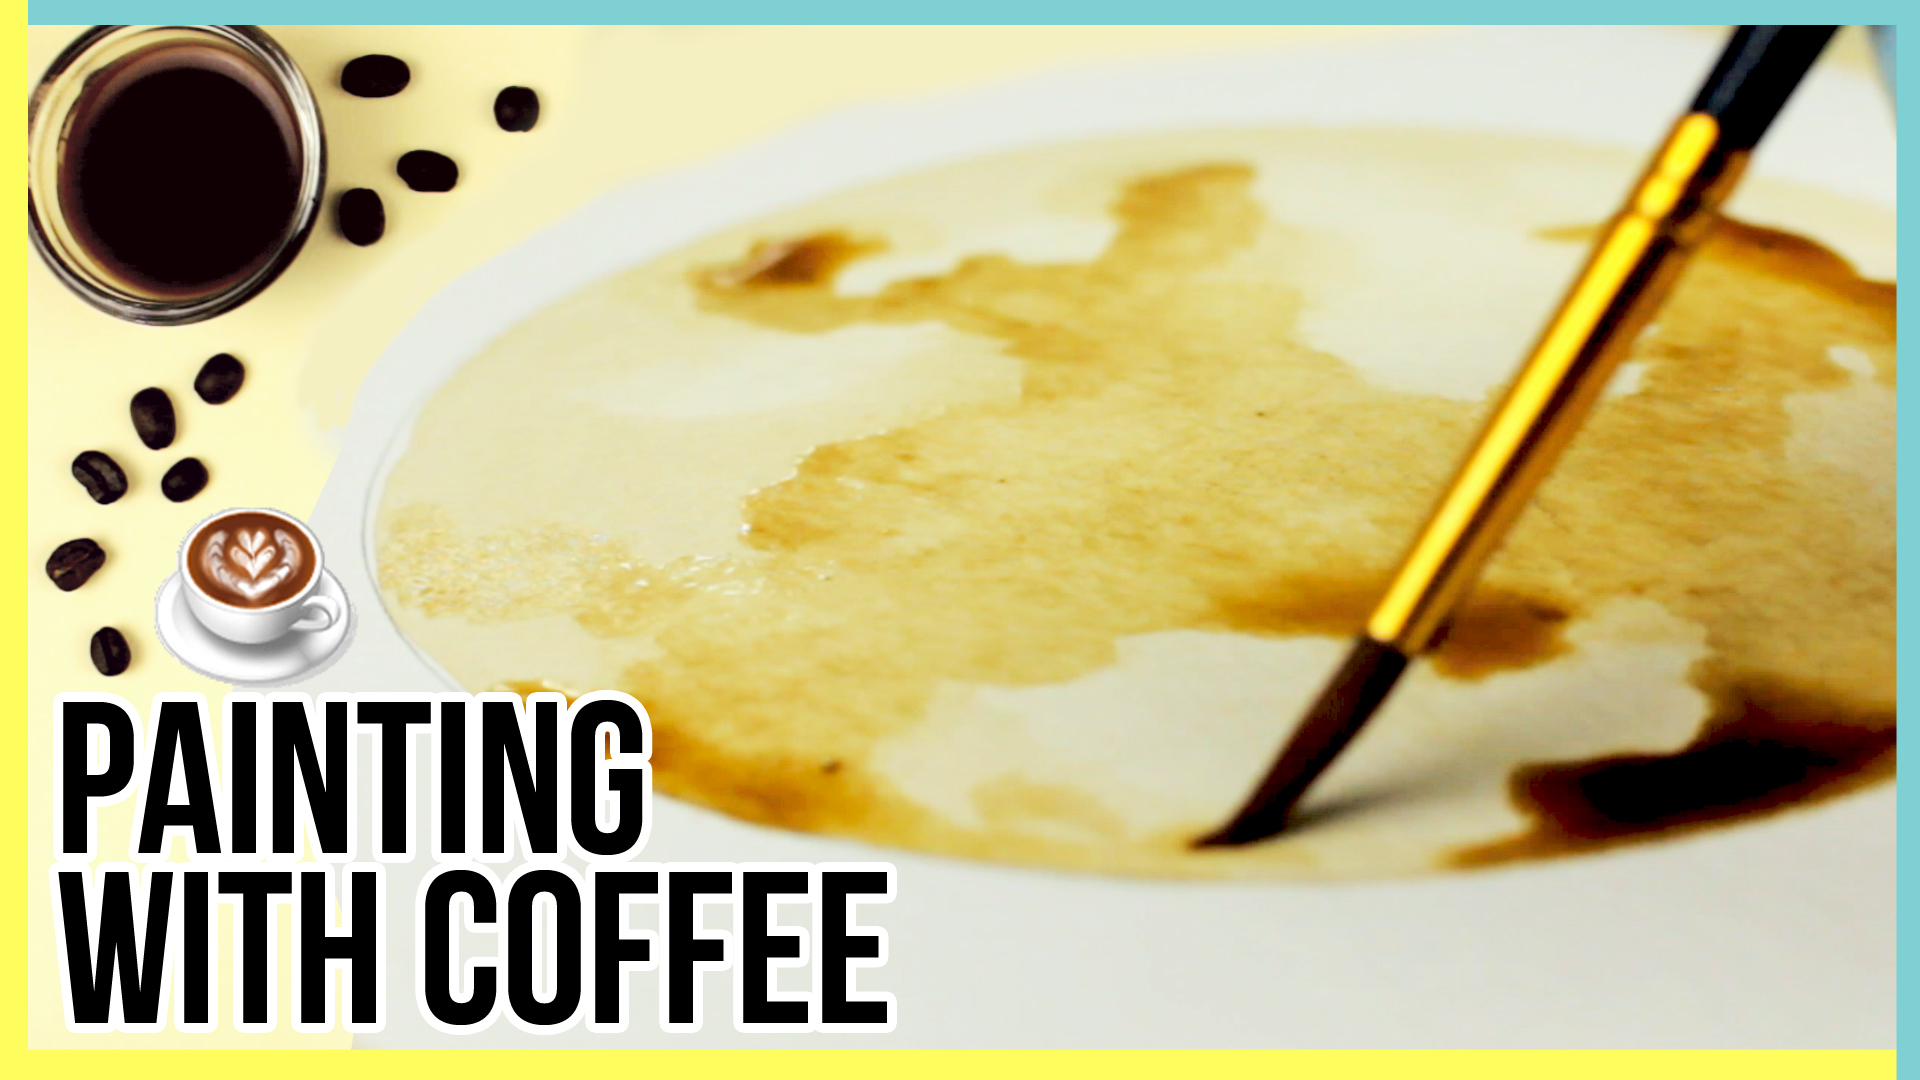 coffee-art-how-to-paint-with-coffee-painting-with-coffee-tutorial03